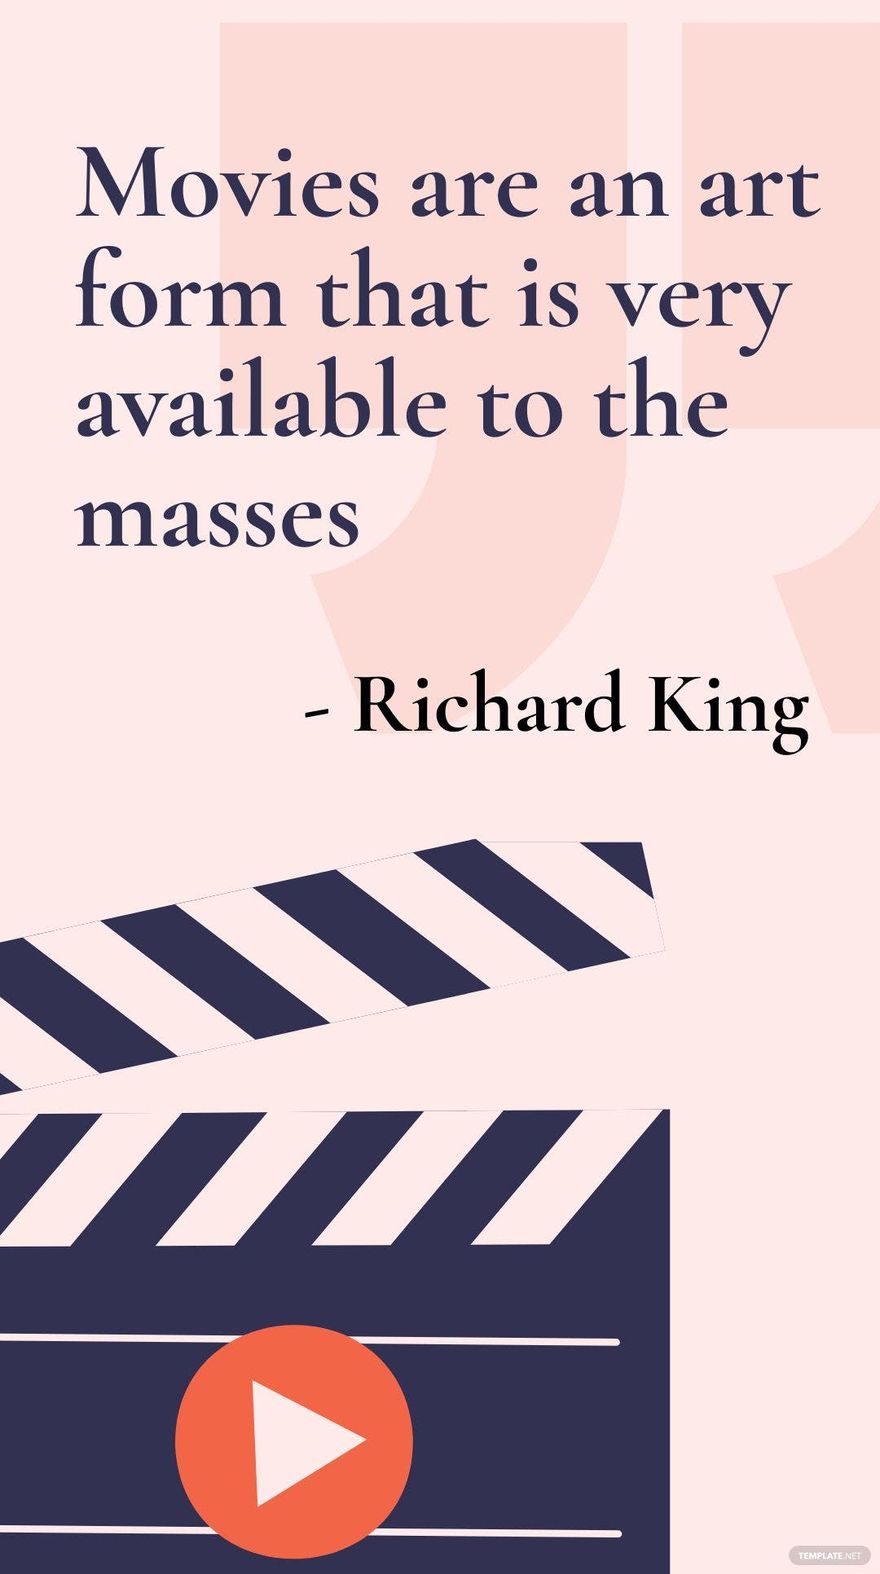 Free Richard King - Movies are an art form that is very available to the masses in JPG